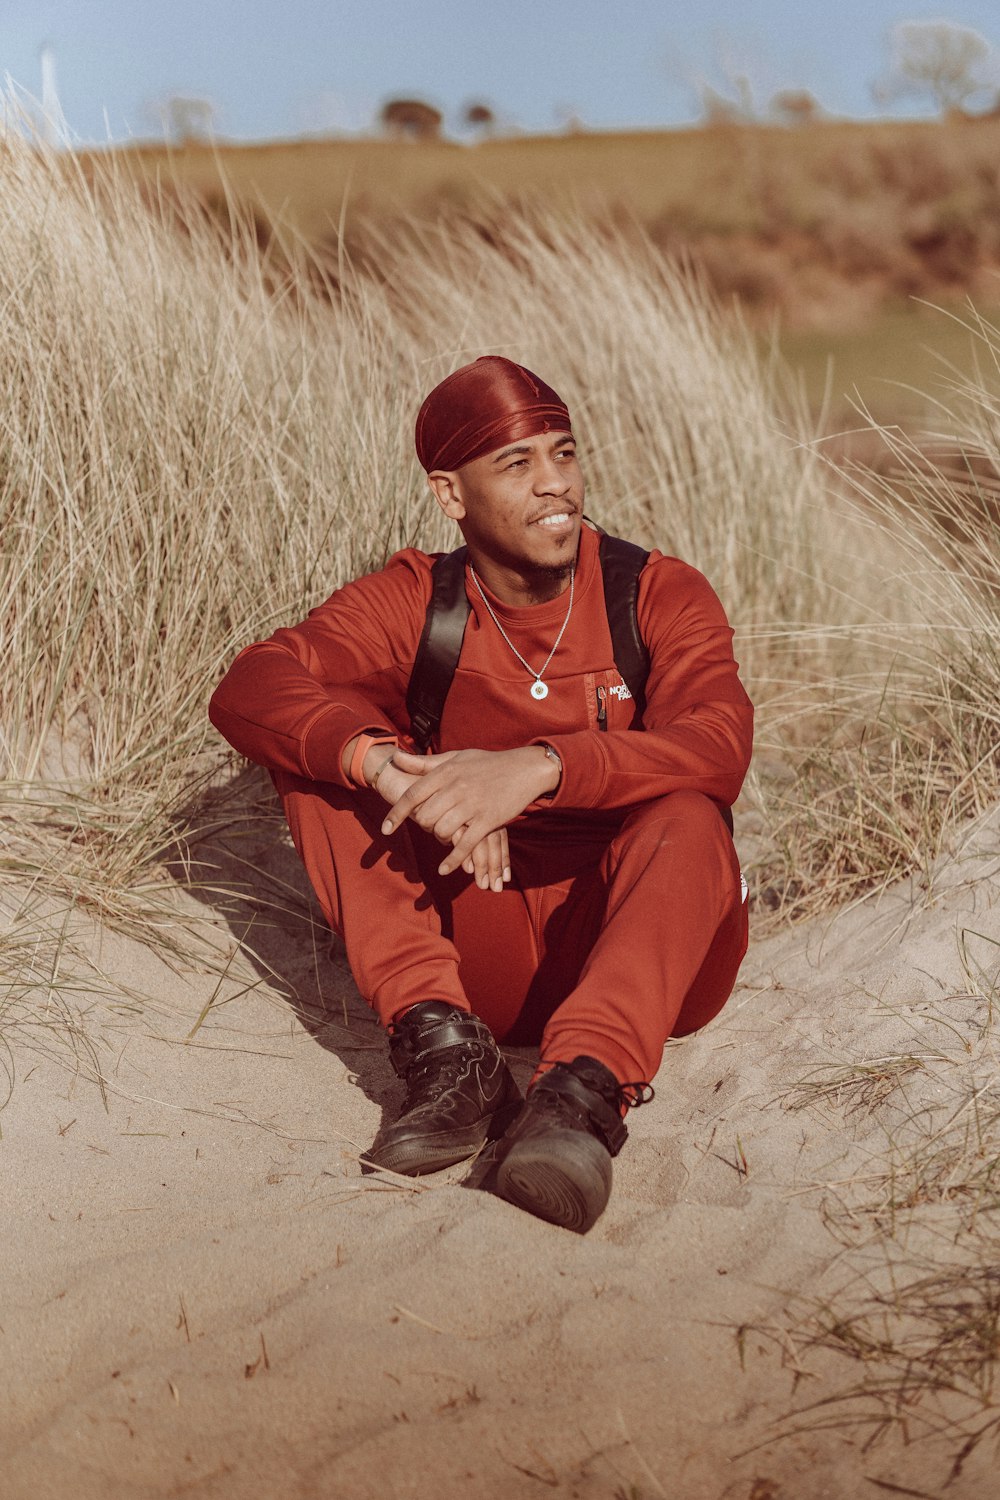 a man in a red outfit sitting on a beach